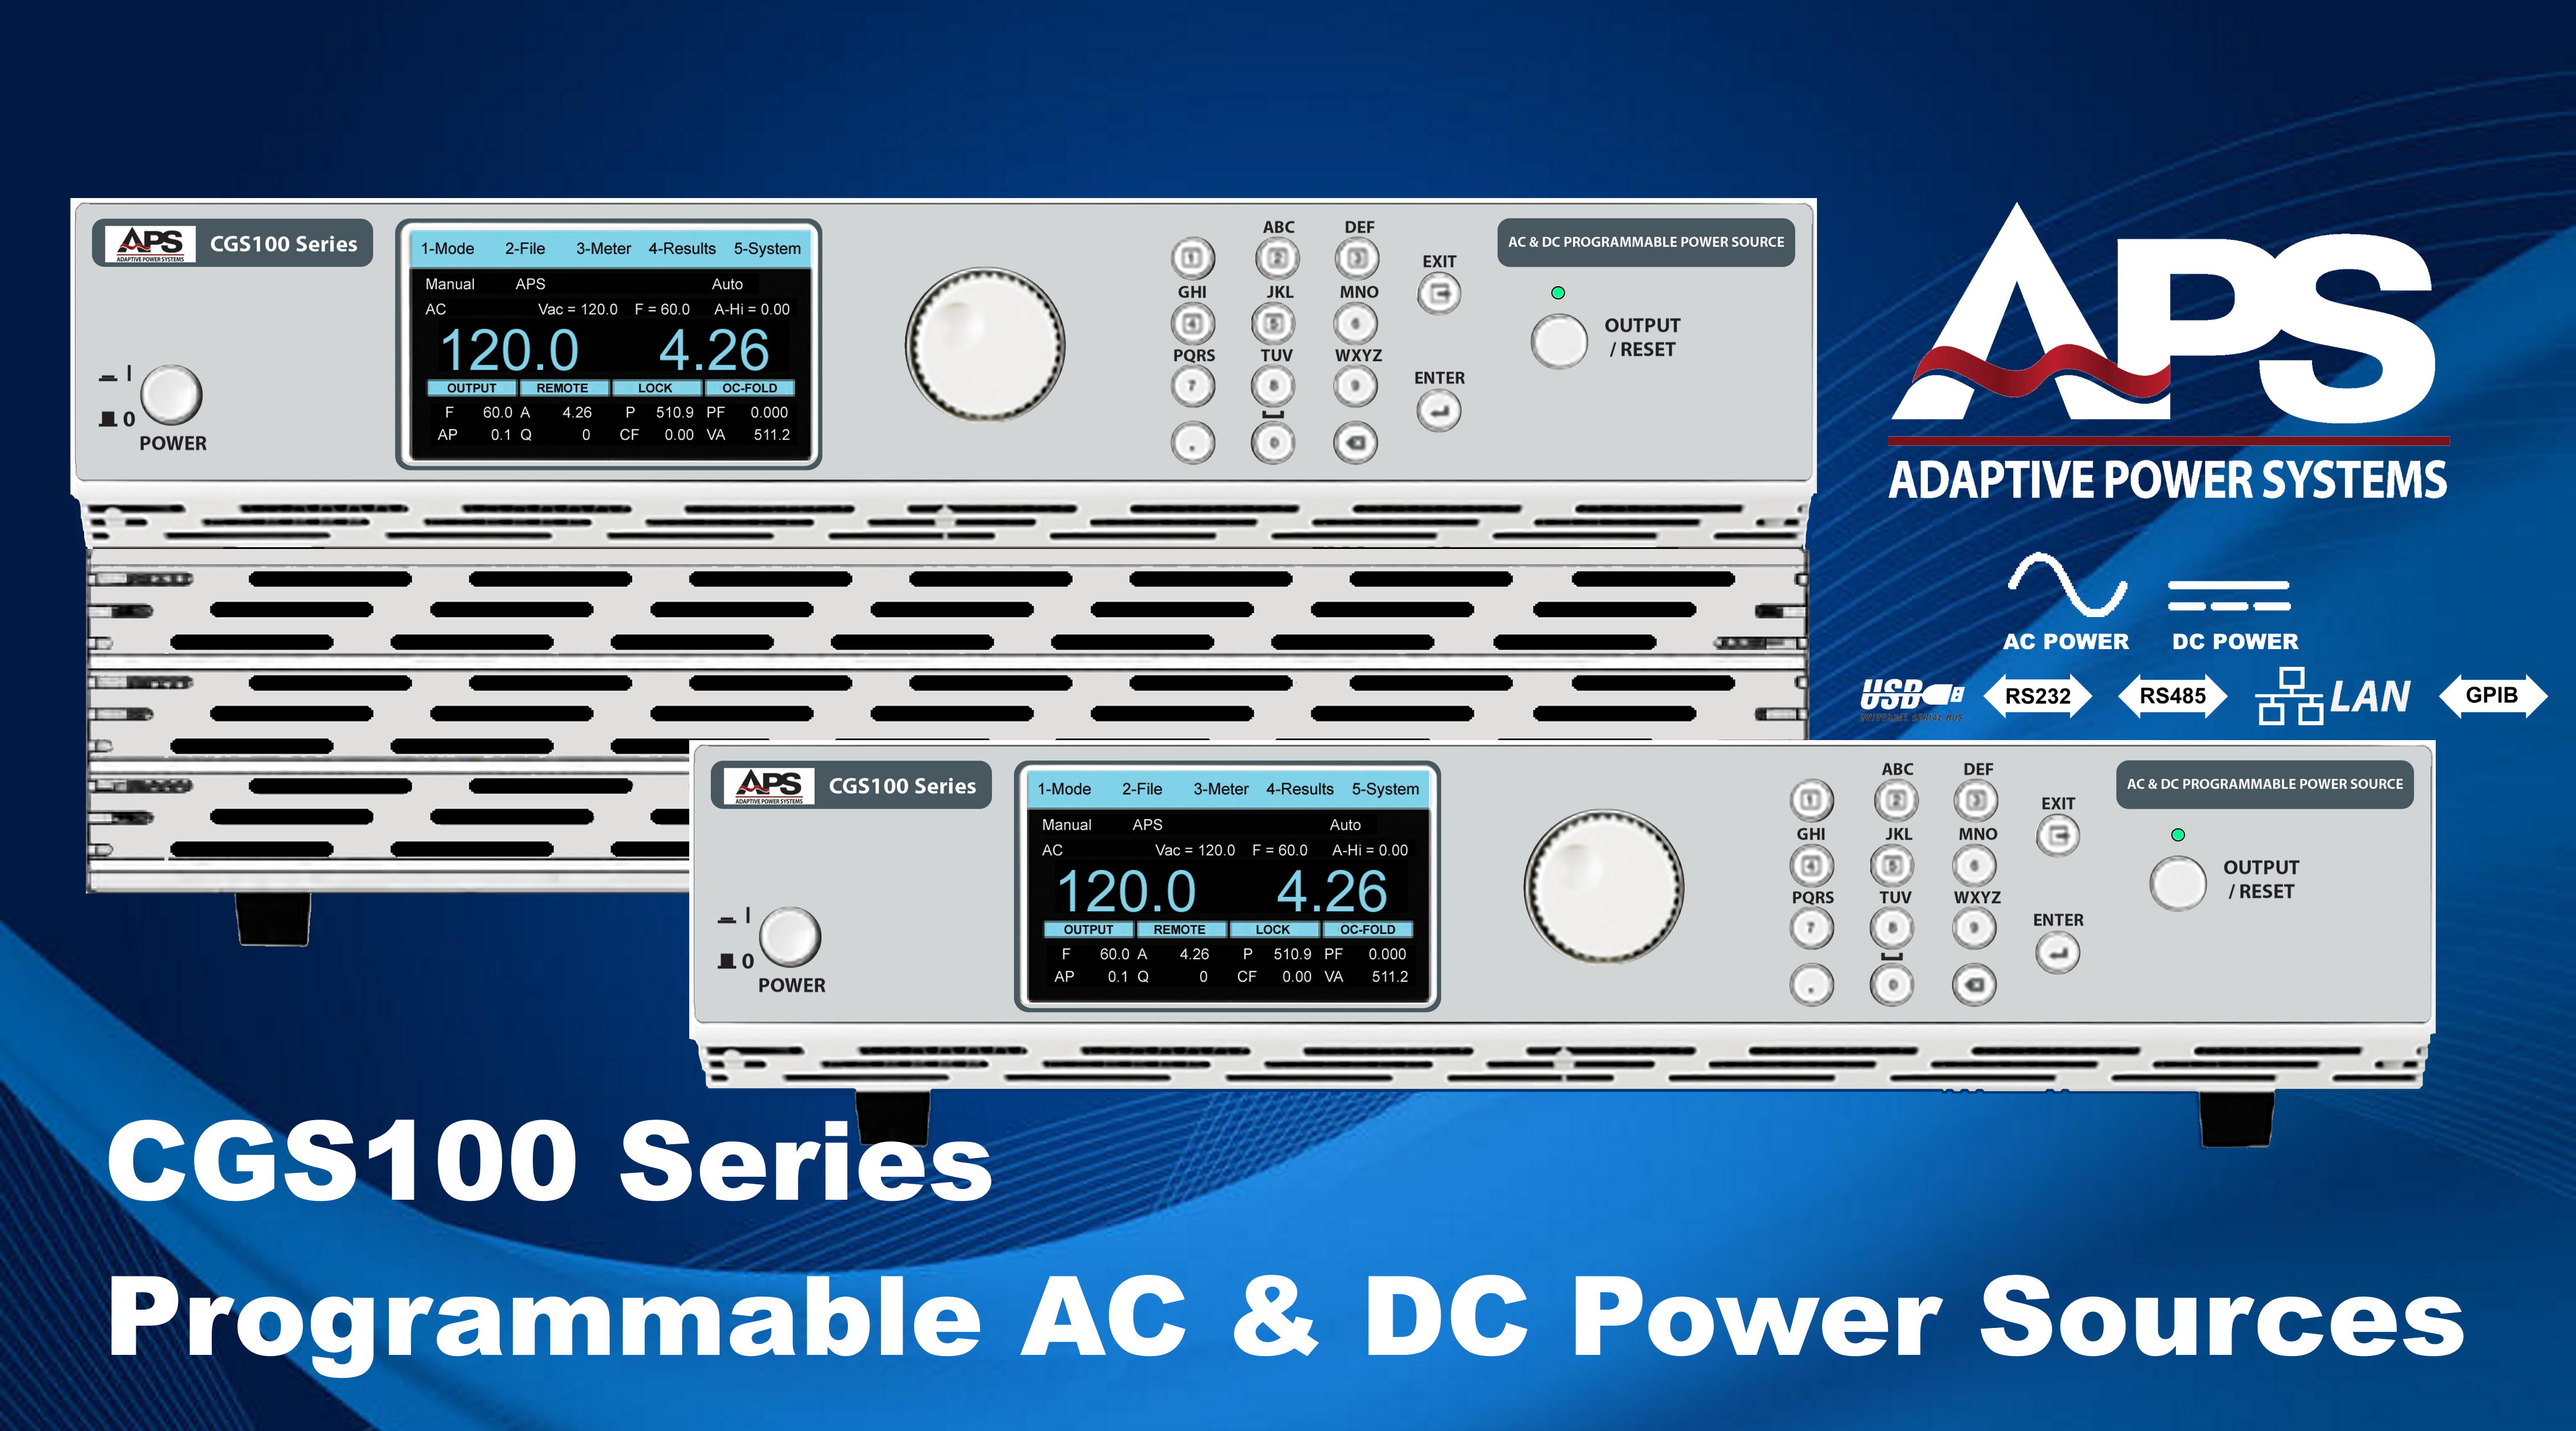 Adaptive Power Systems introduces CGS100 Series AC and DC Power Sources